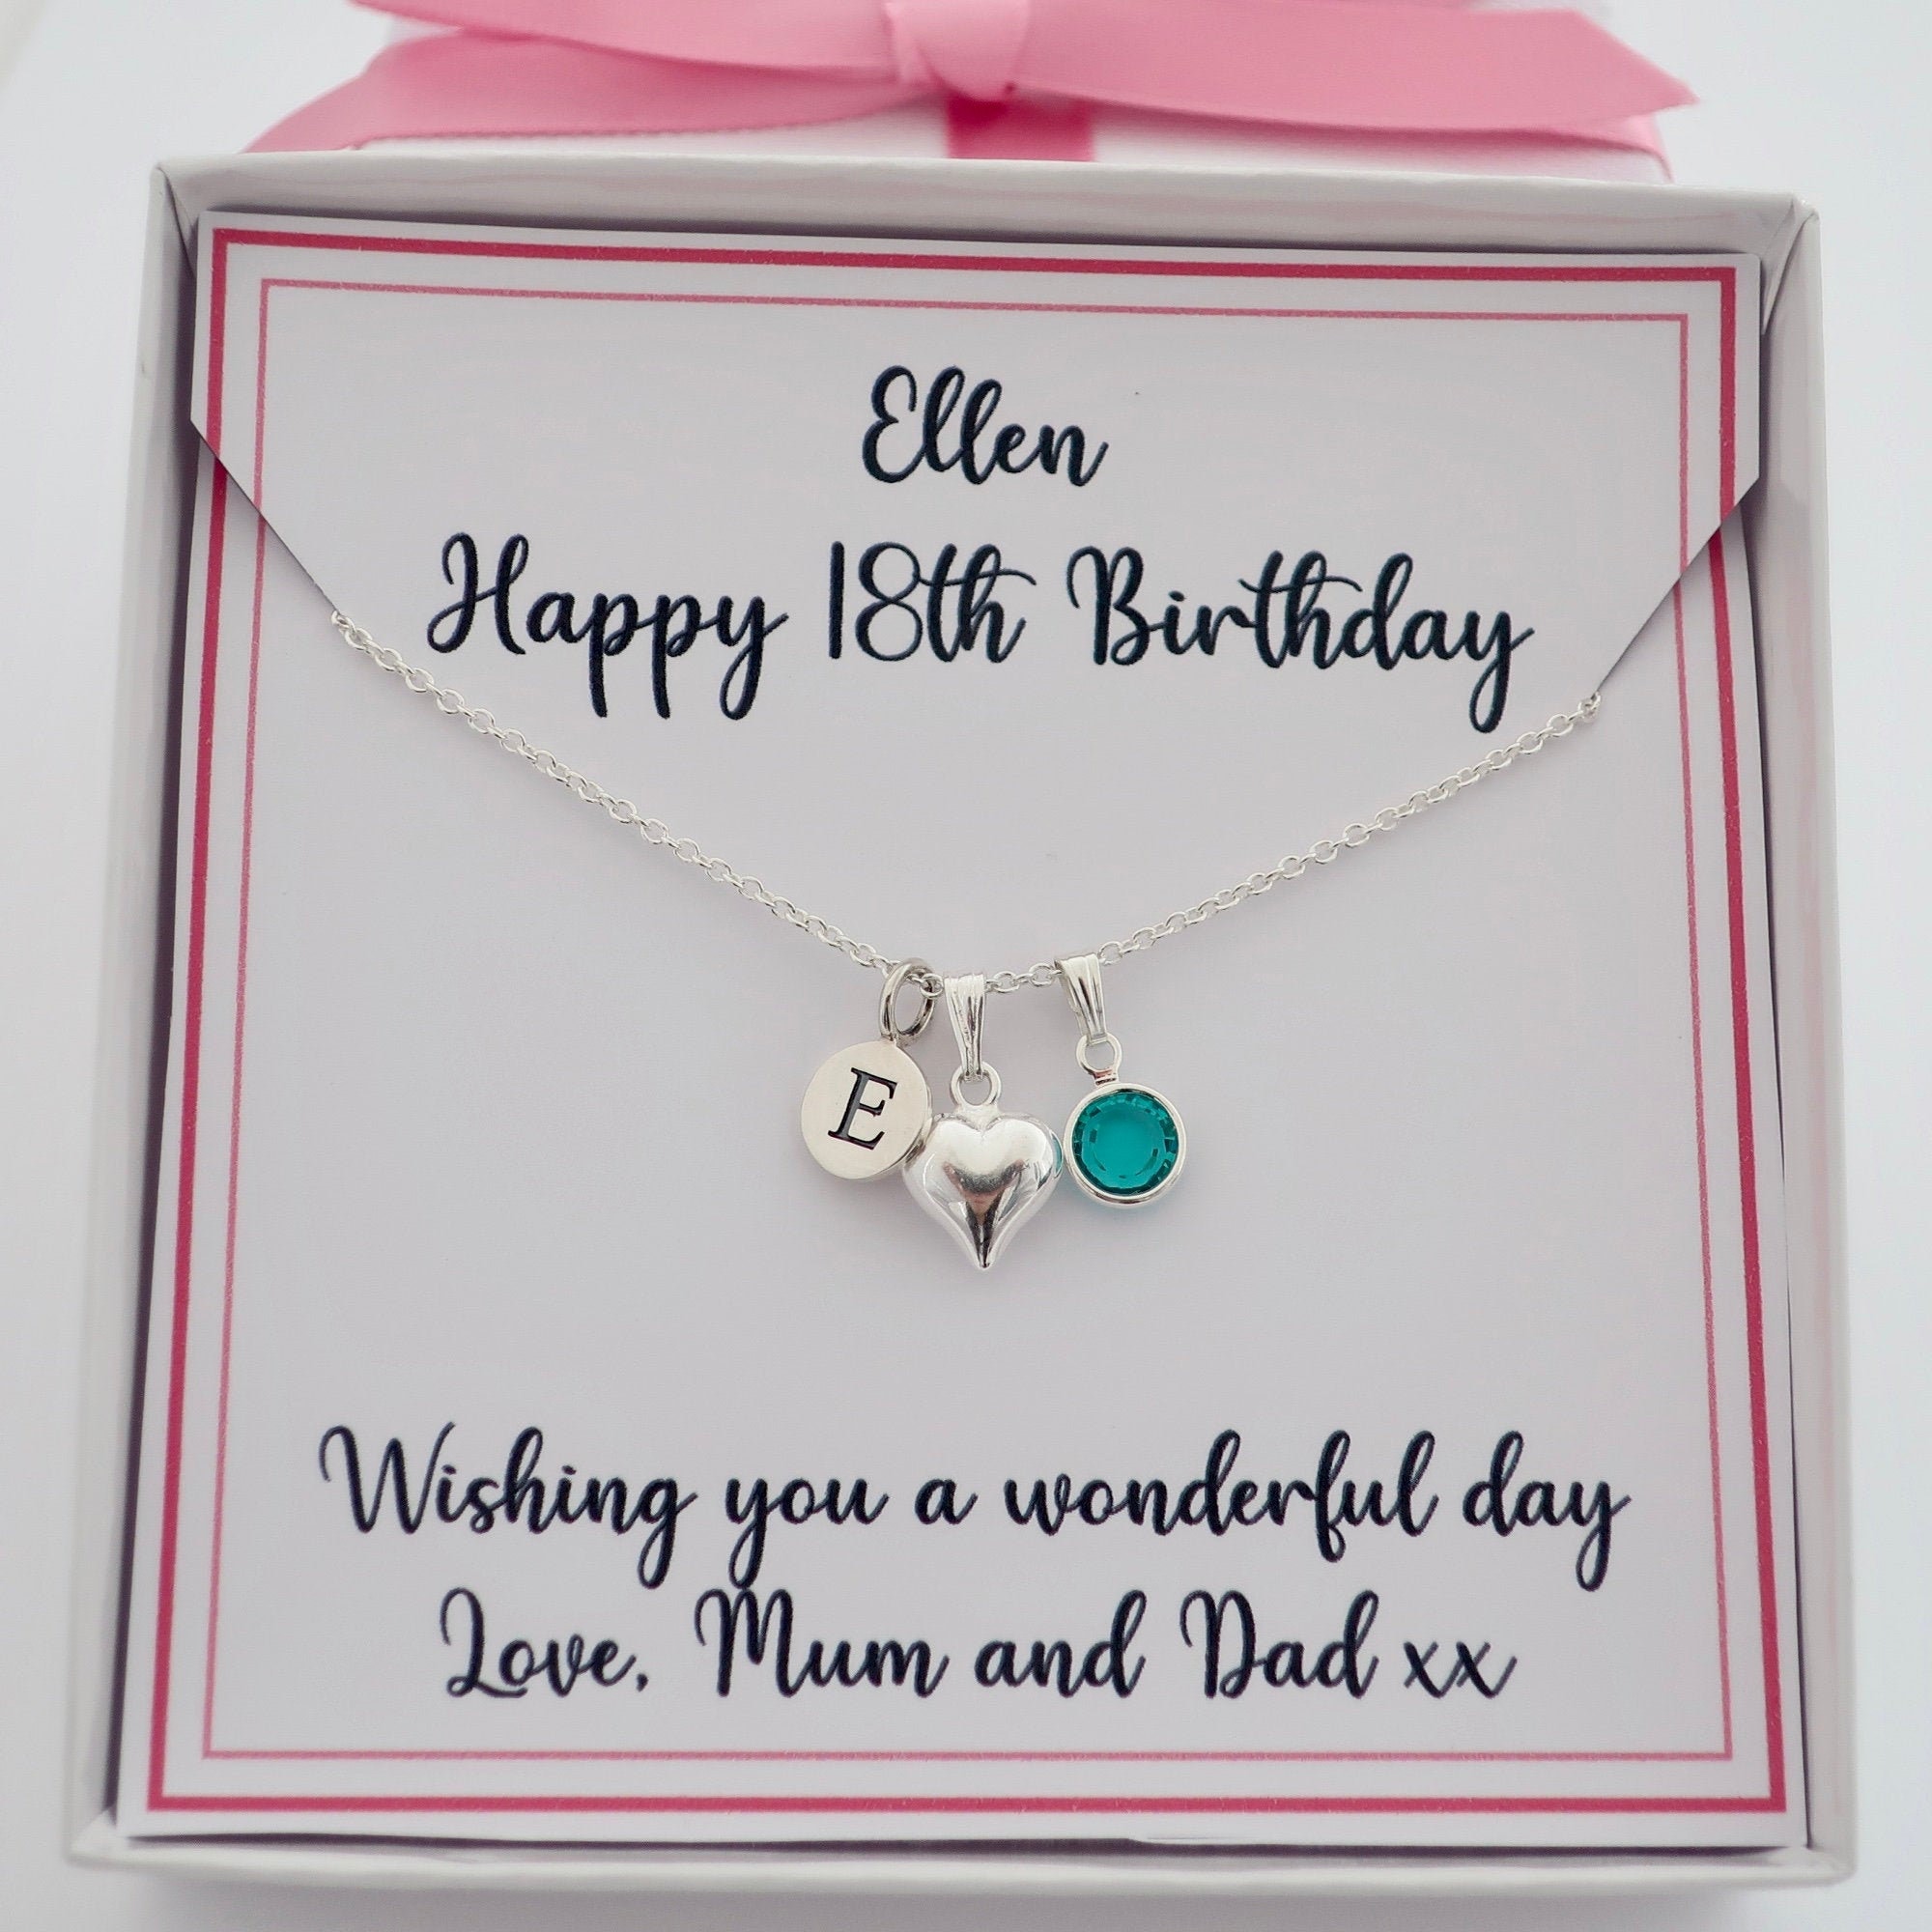  18th Birthday Gifts for Girls,18th Birthday Gifts for Daughter,  Sister,Girlfriends,Heart Crystal Keepsake,Unique 18th Birthday Present  Ornament Collection for Her : Office Products